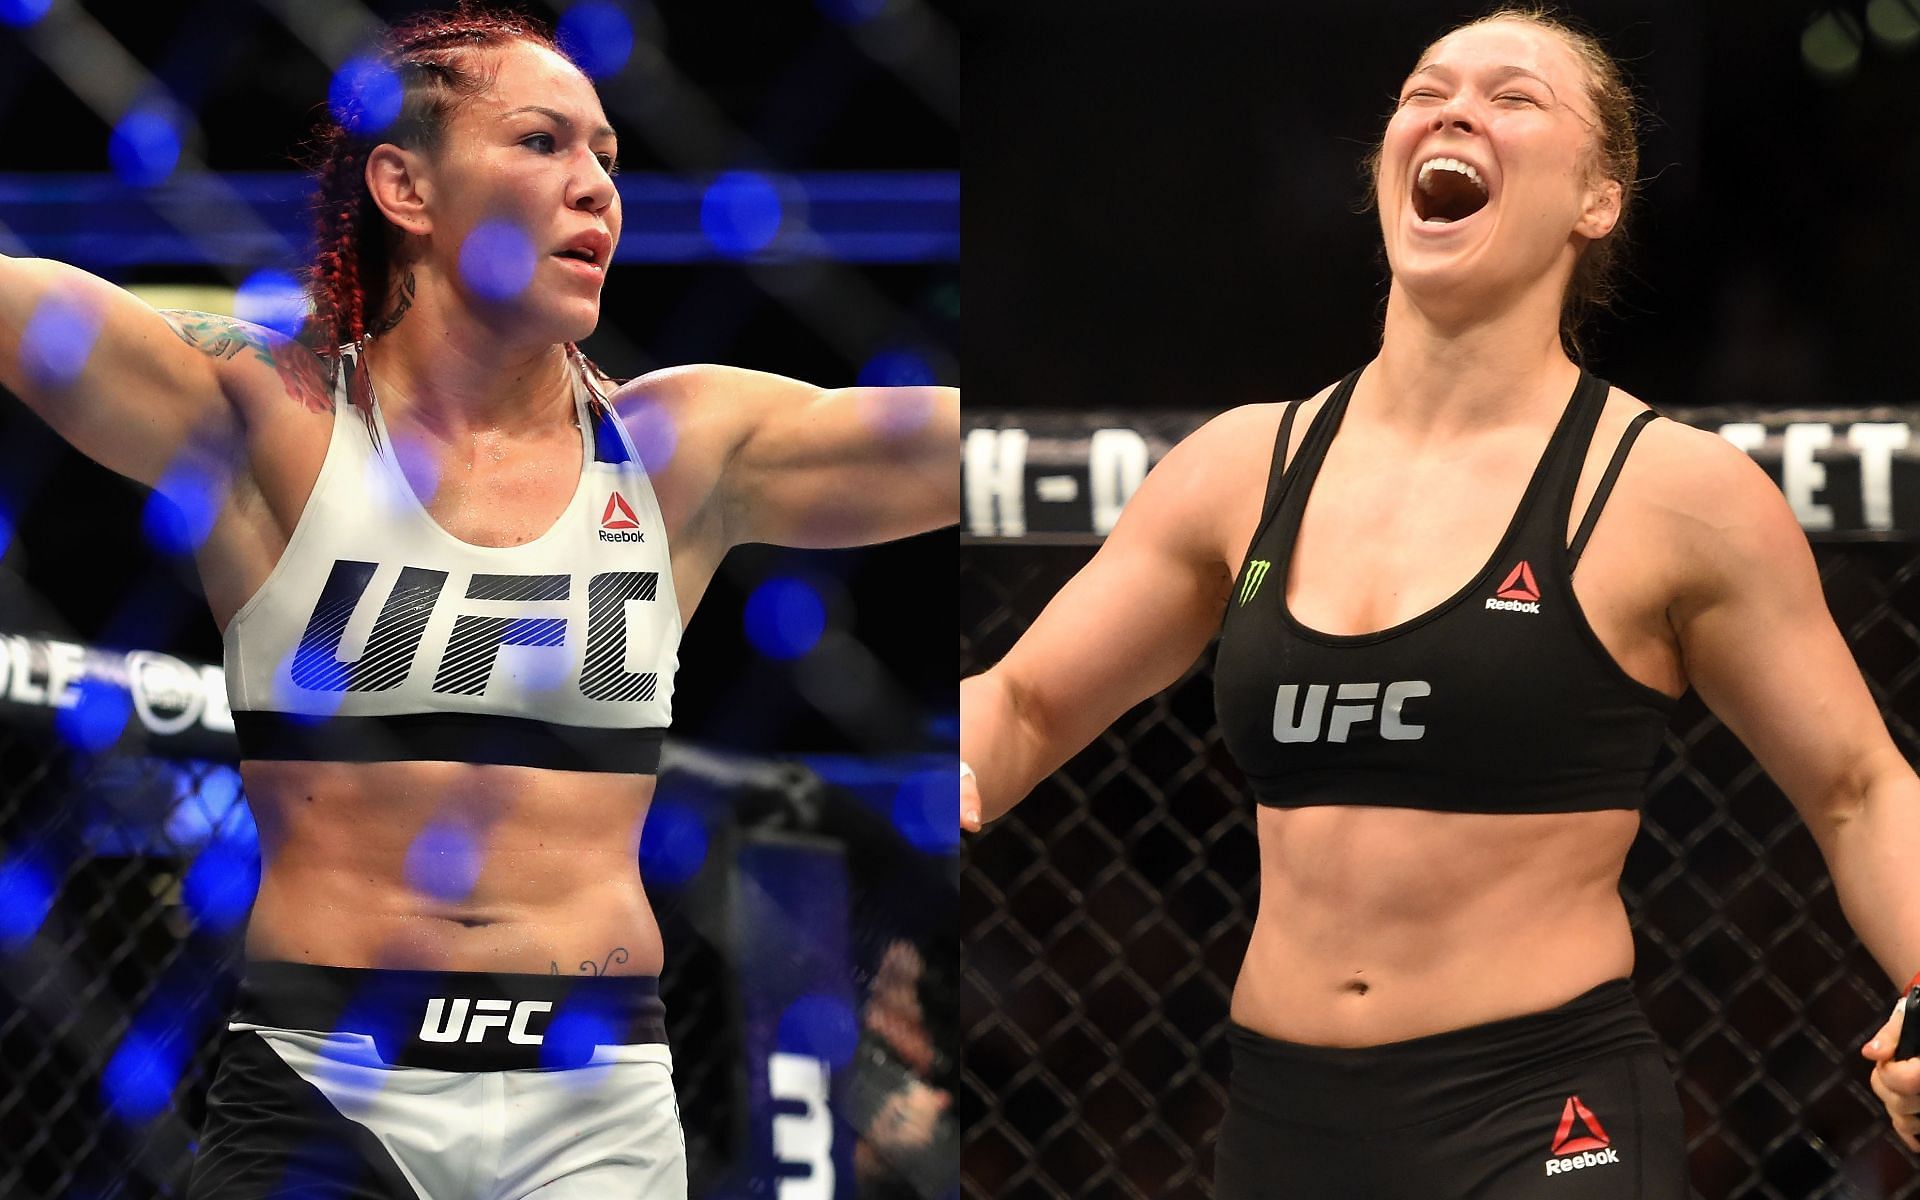 Cris Cyborg (left) and Ronda Rousey (right) (Image via Getty)